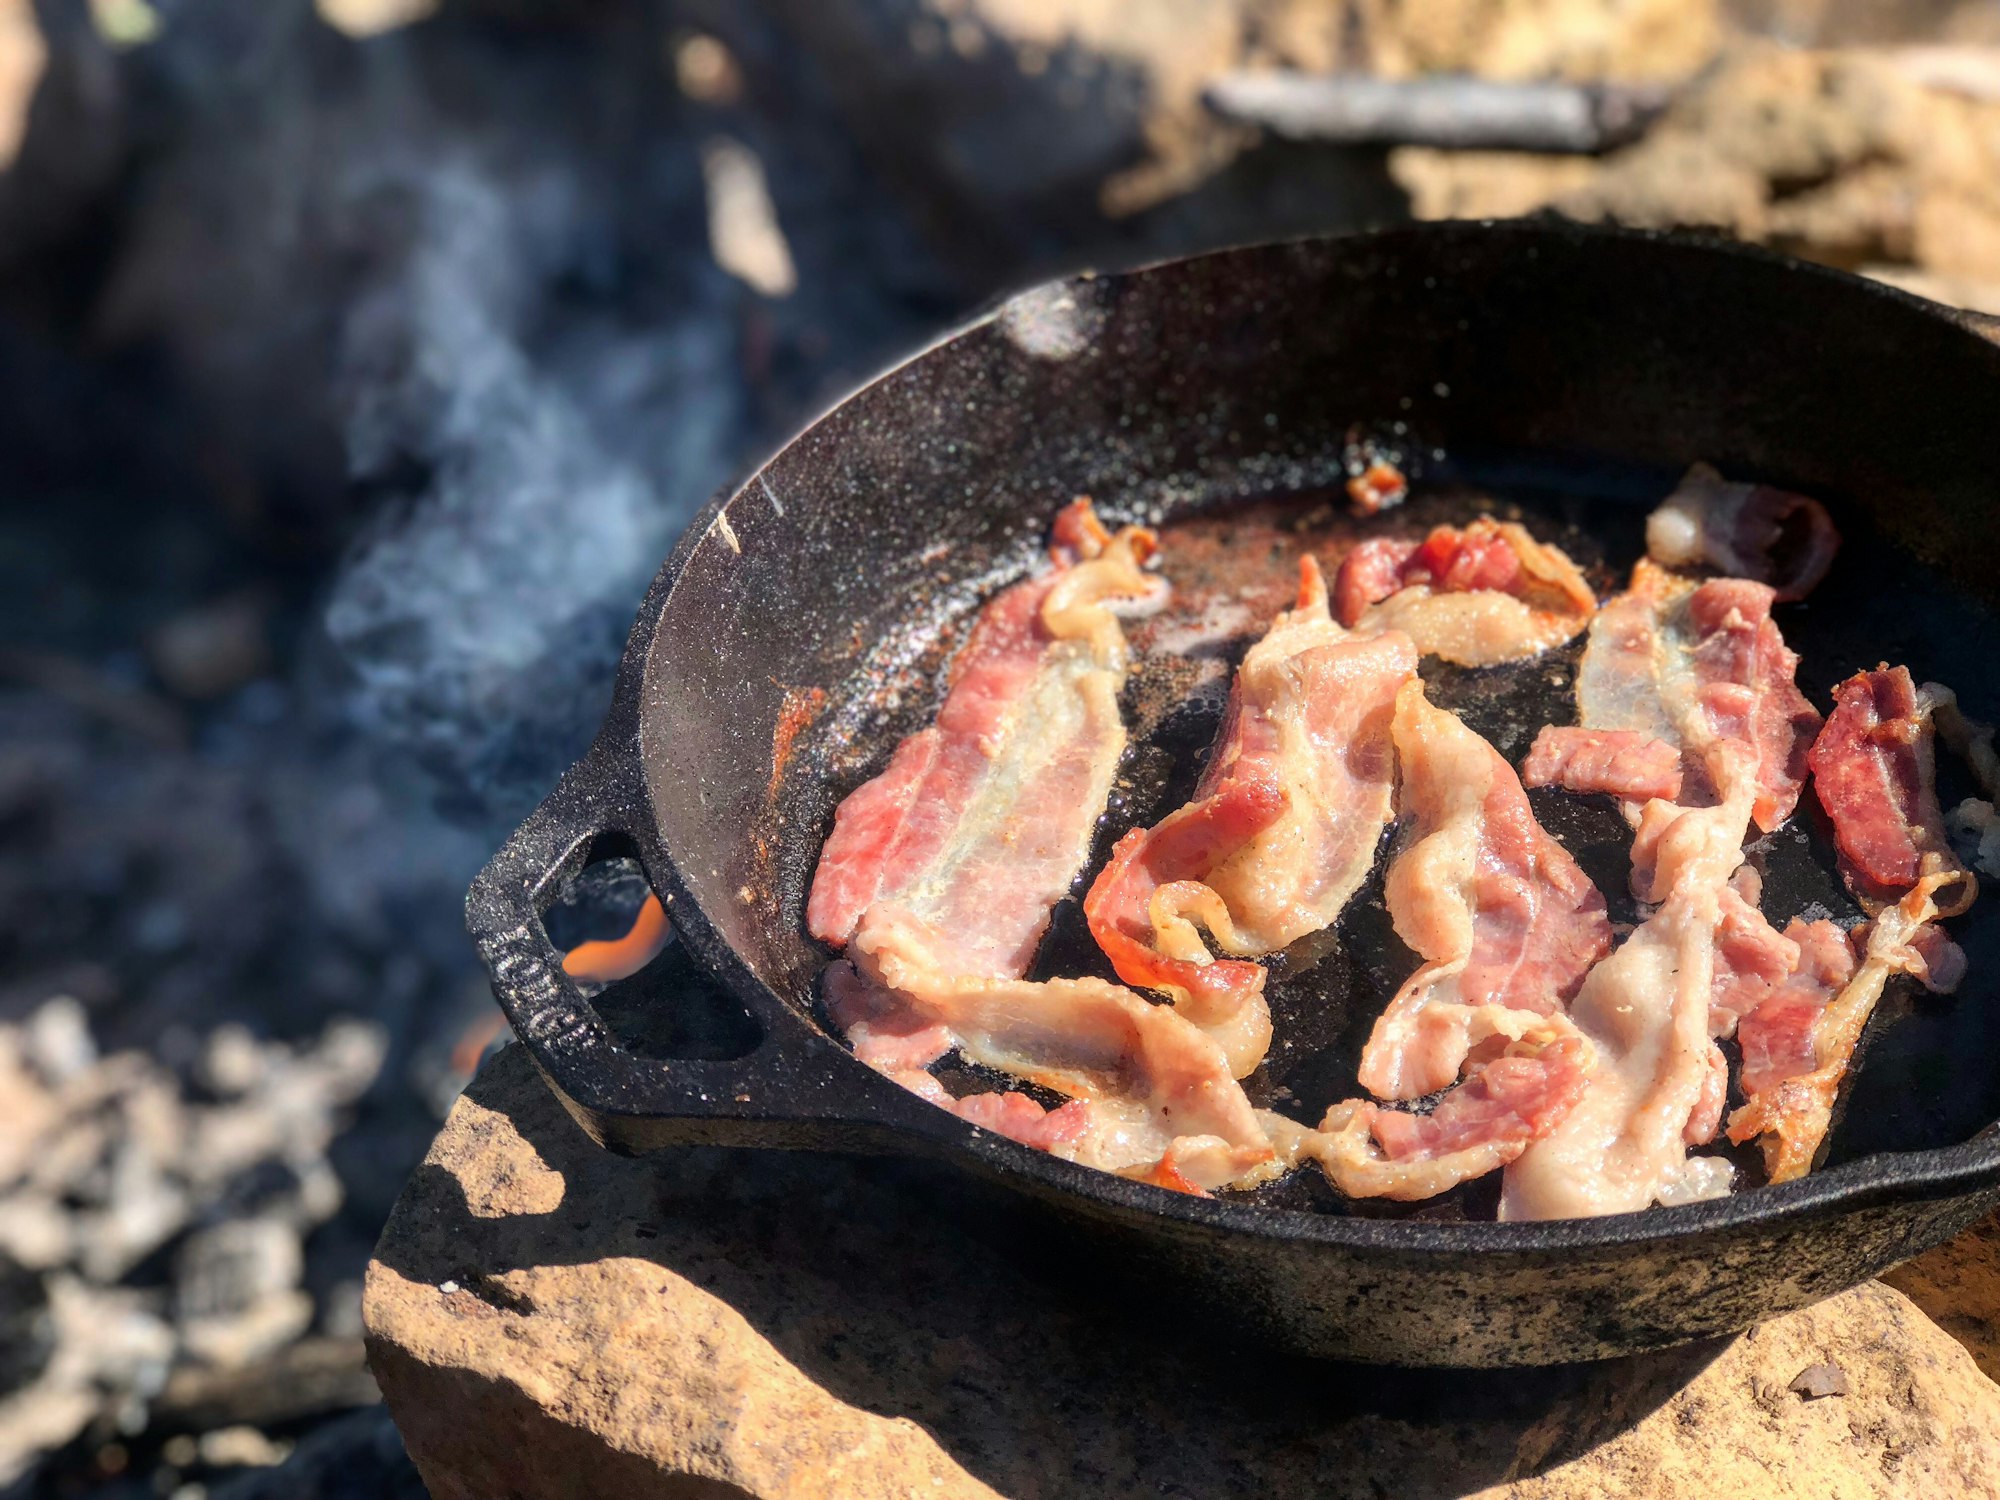 Just bought a cast iron for our summertime camping adventures.  Learning how to build a cooking efficient campfire from scratch was the ticket.  Luckily my boyfriend knows how to build the perfect one.  After an early morning of waking up and getting the fire started, a few hours later we had coals and our rocks heated to the perfect temperature. 
 This bacon took only a few minutes to cook, on the surface of a rock mind you, in just a few minutes. Mmm, bacon.